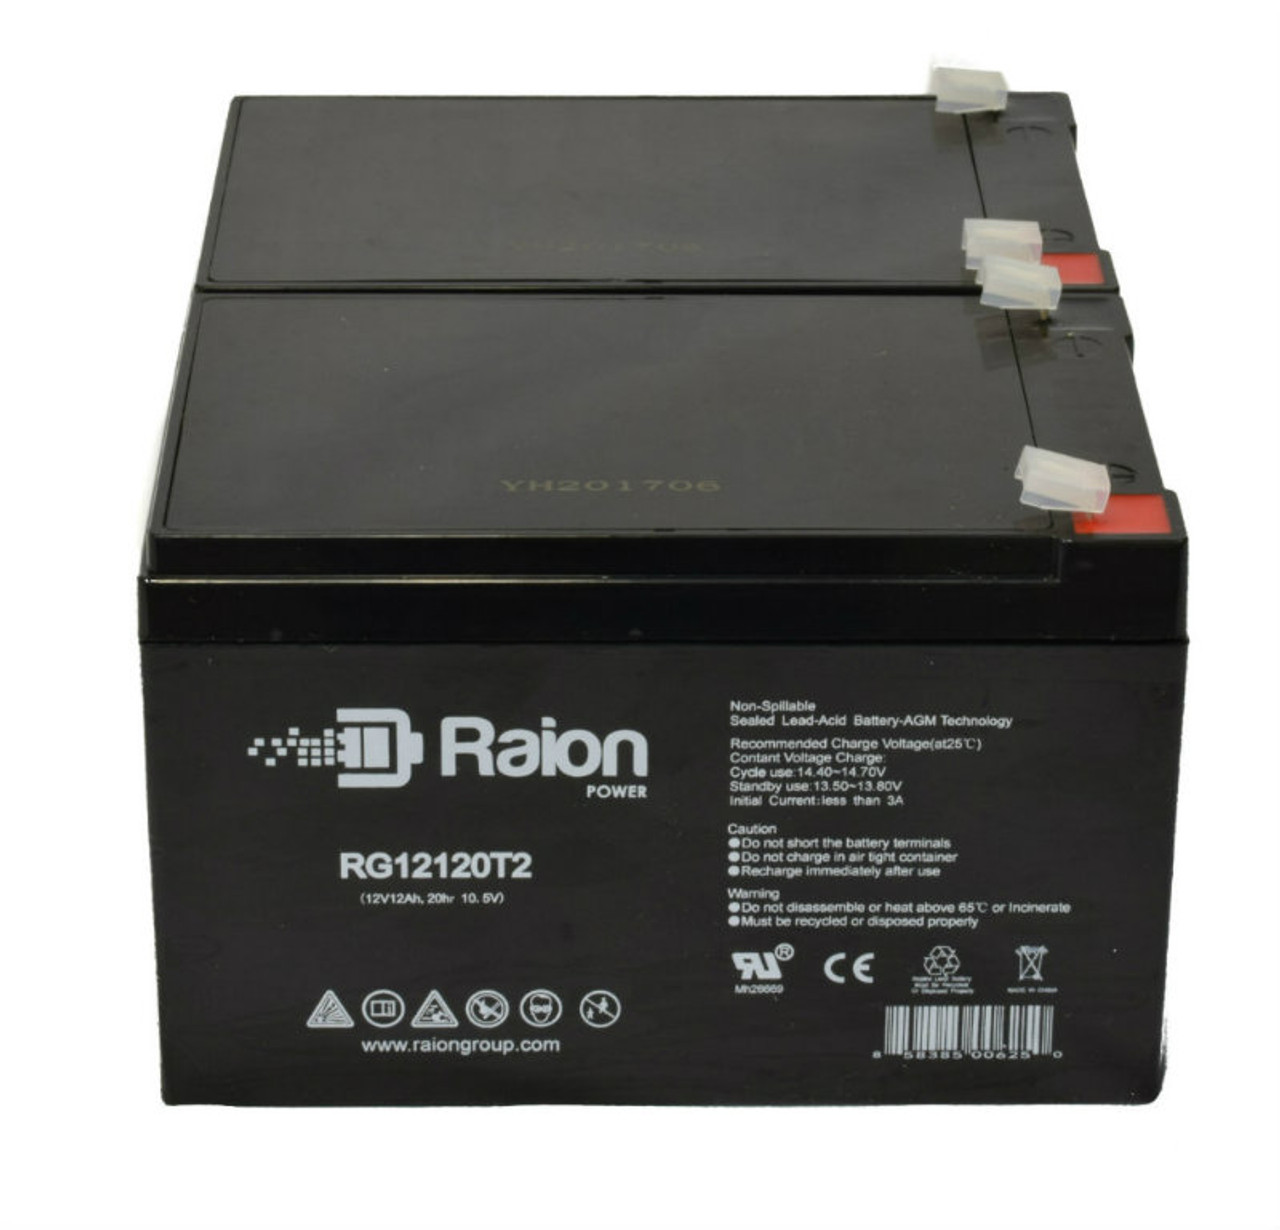 Raion Power 12V 12Ah Non-Spillable Compatible Replacement Battery for Delta DTM 1215 - (2 Pack)